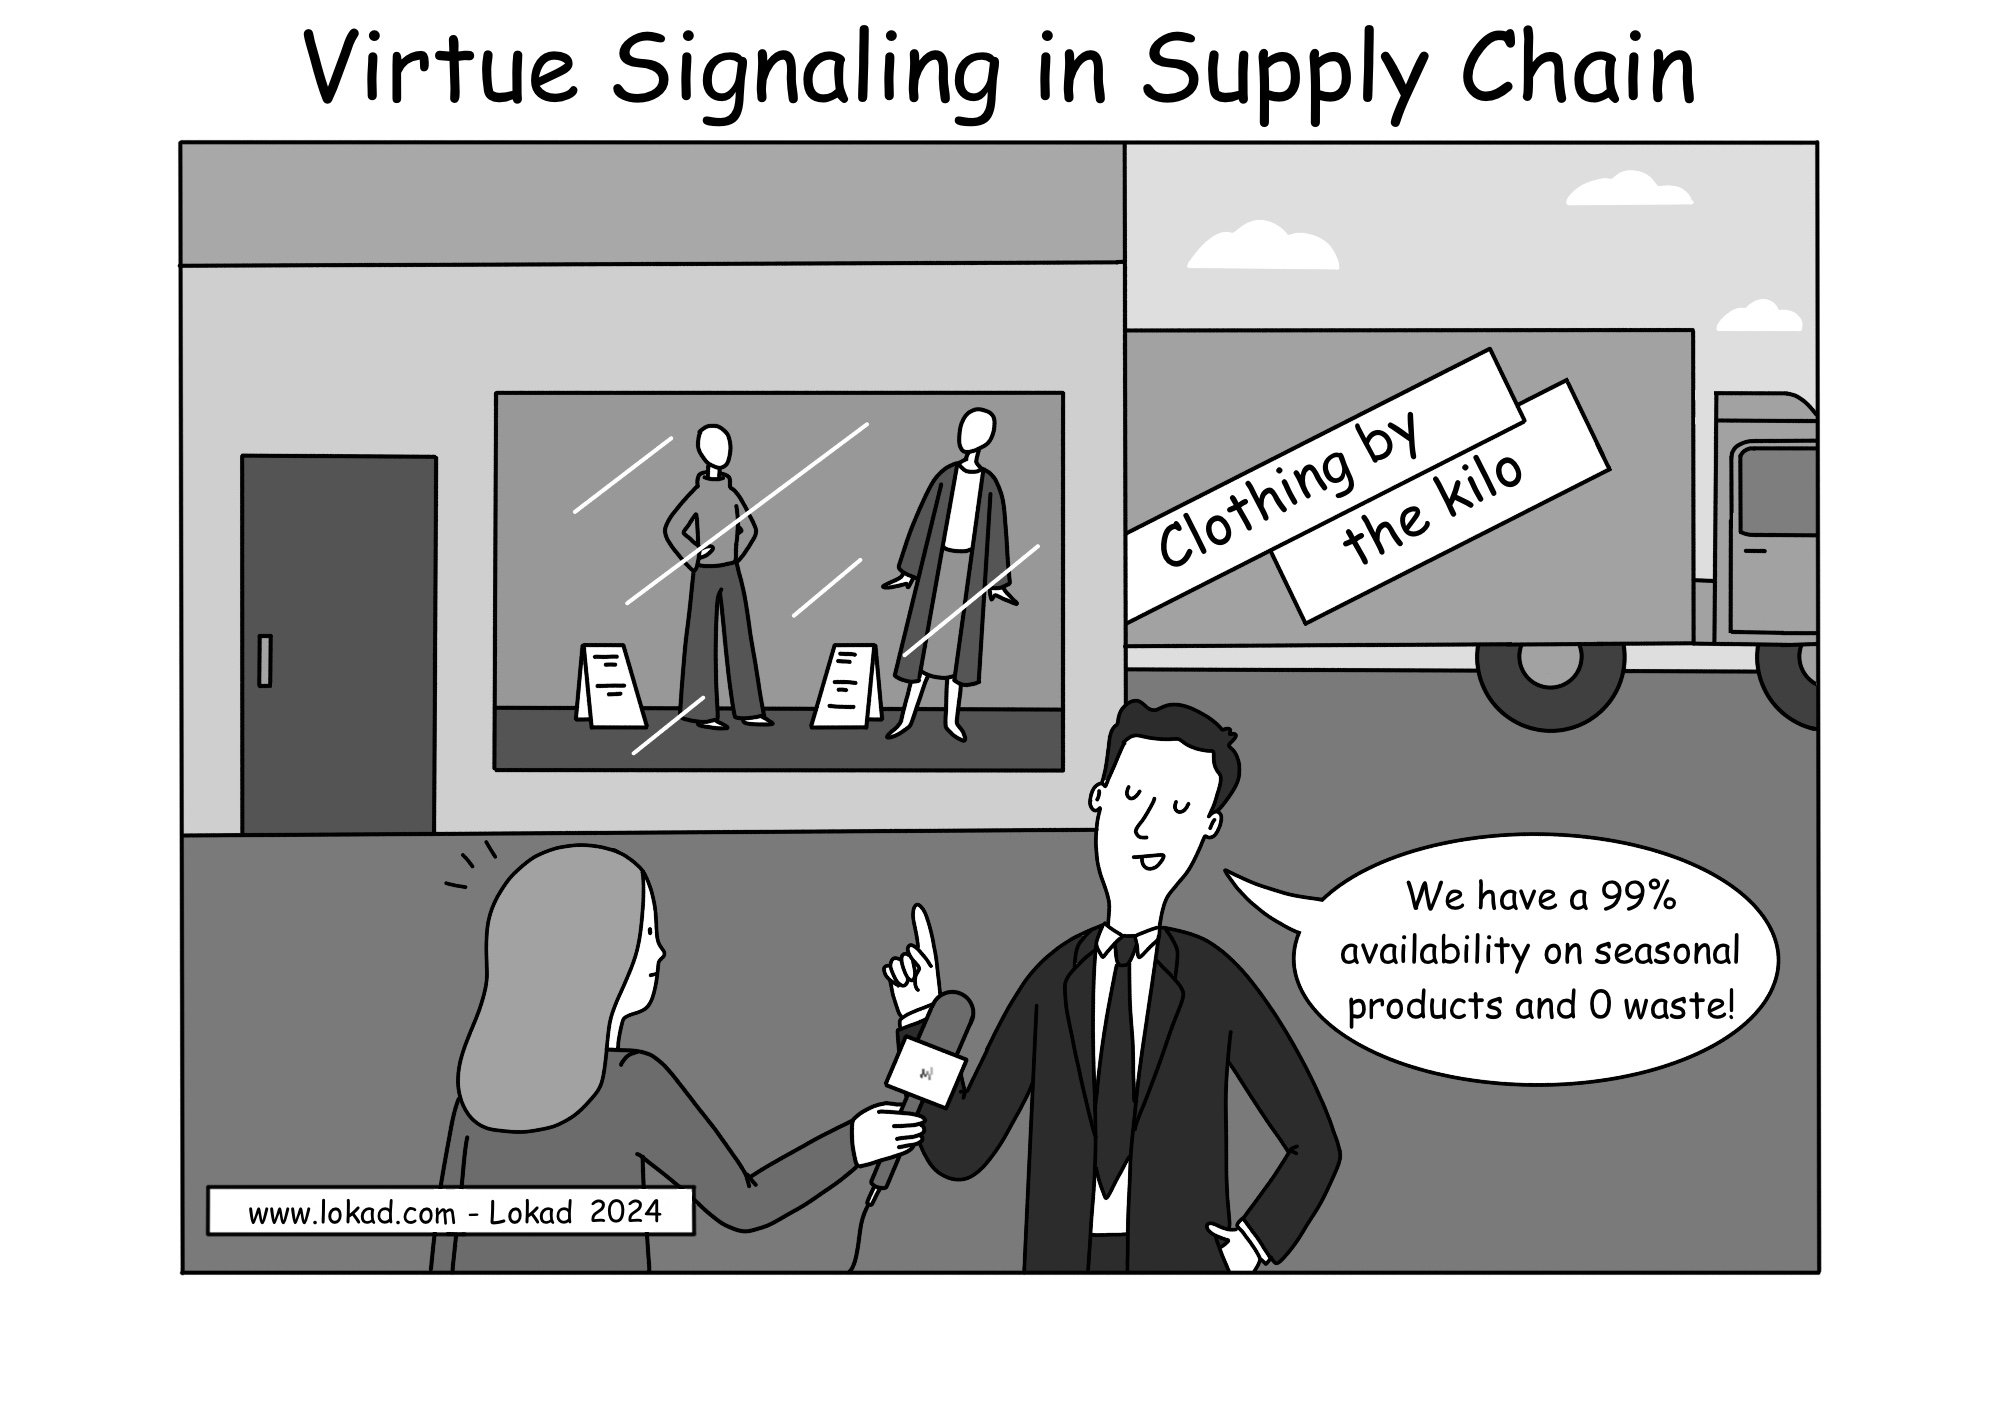 Virtue Signaling in Supply Chain